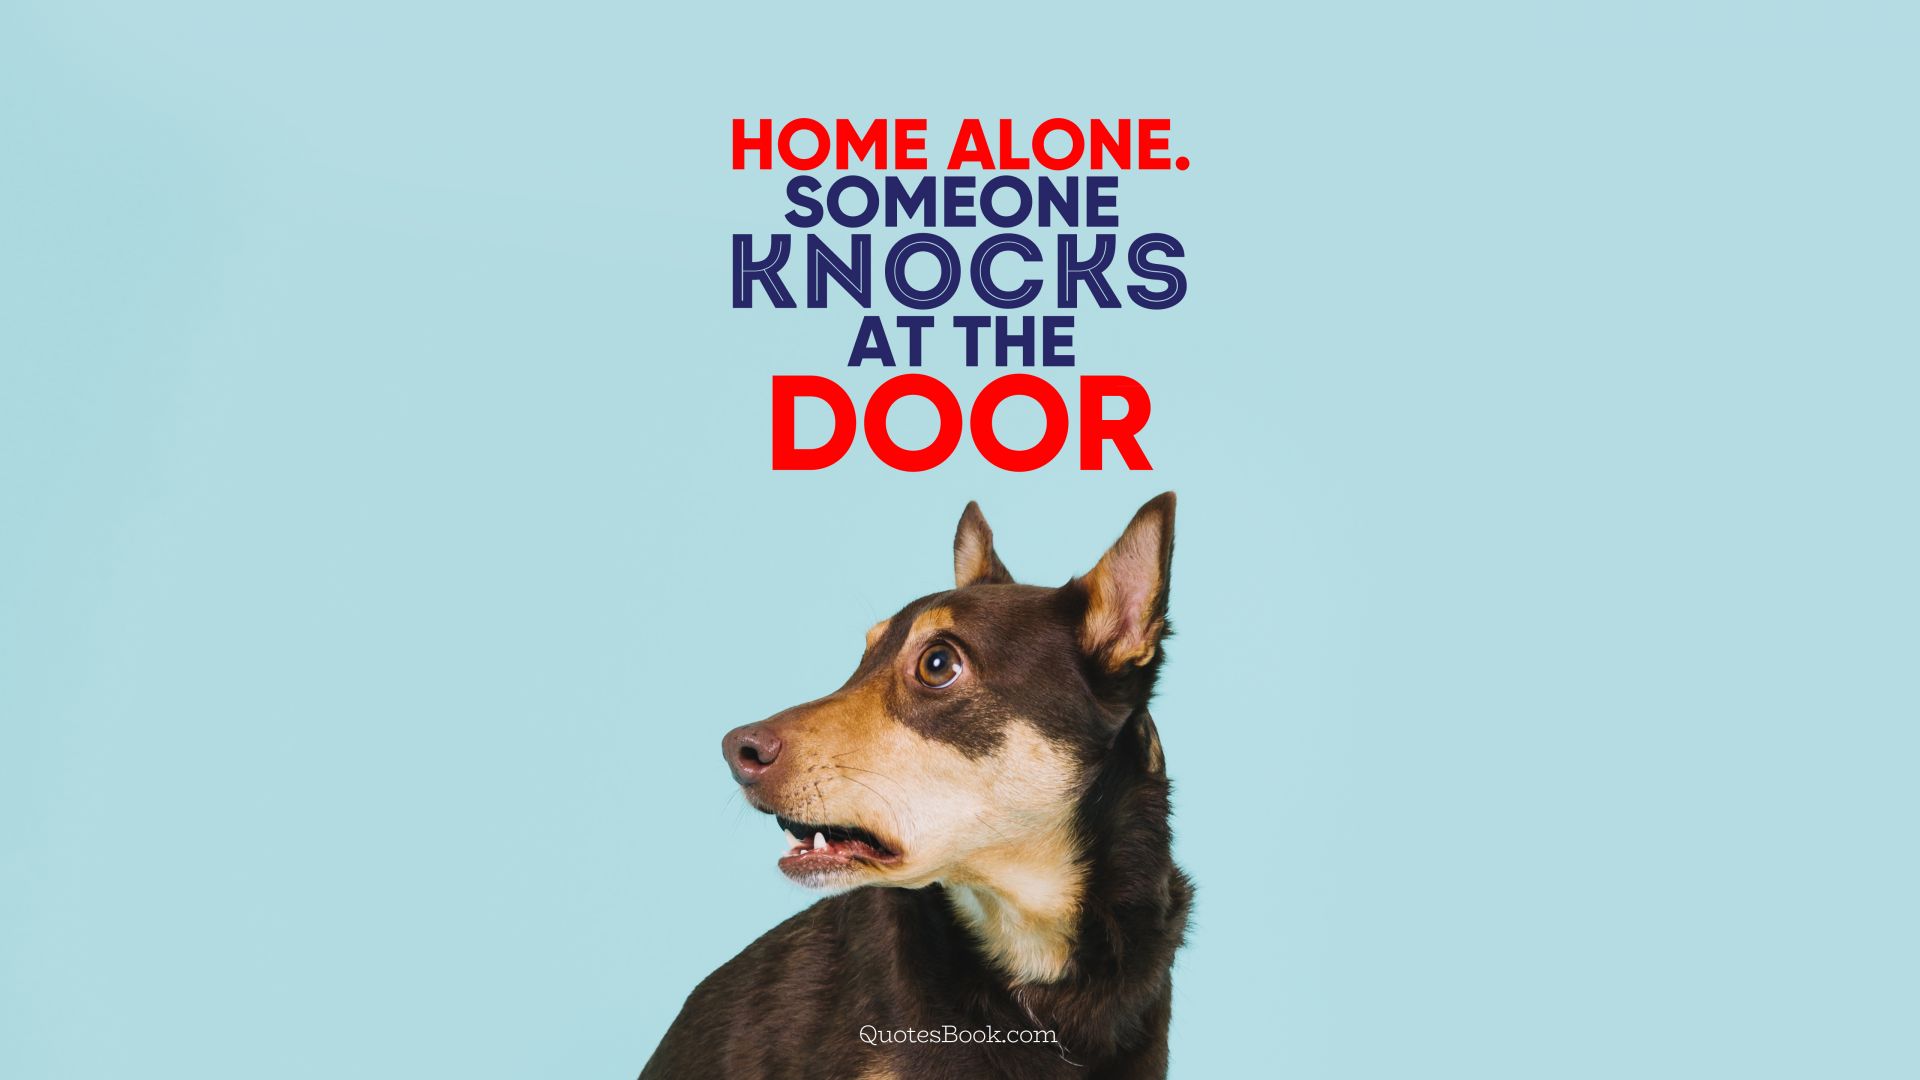 Home alone. Someone knocks at the door